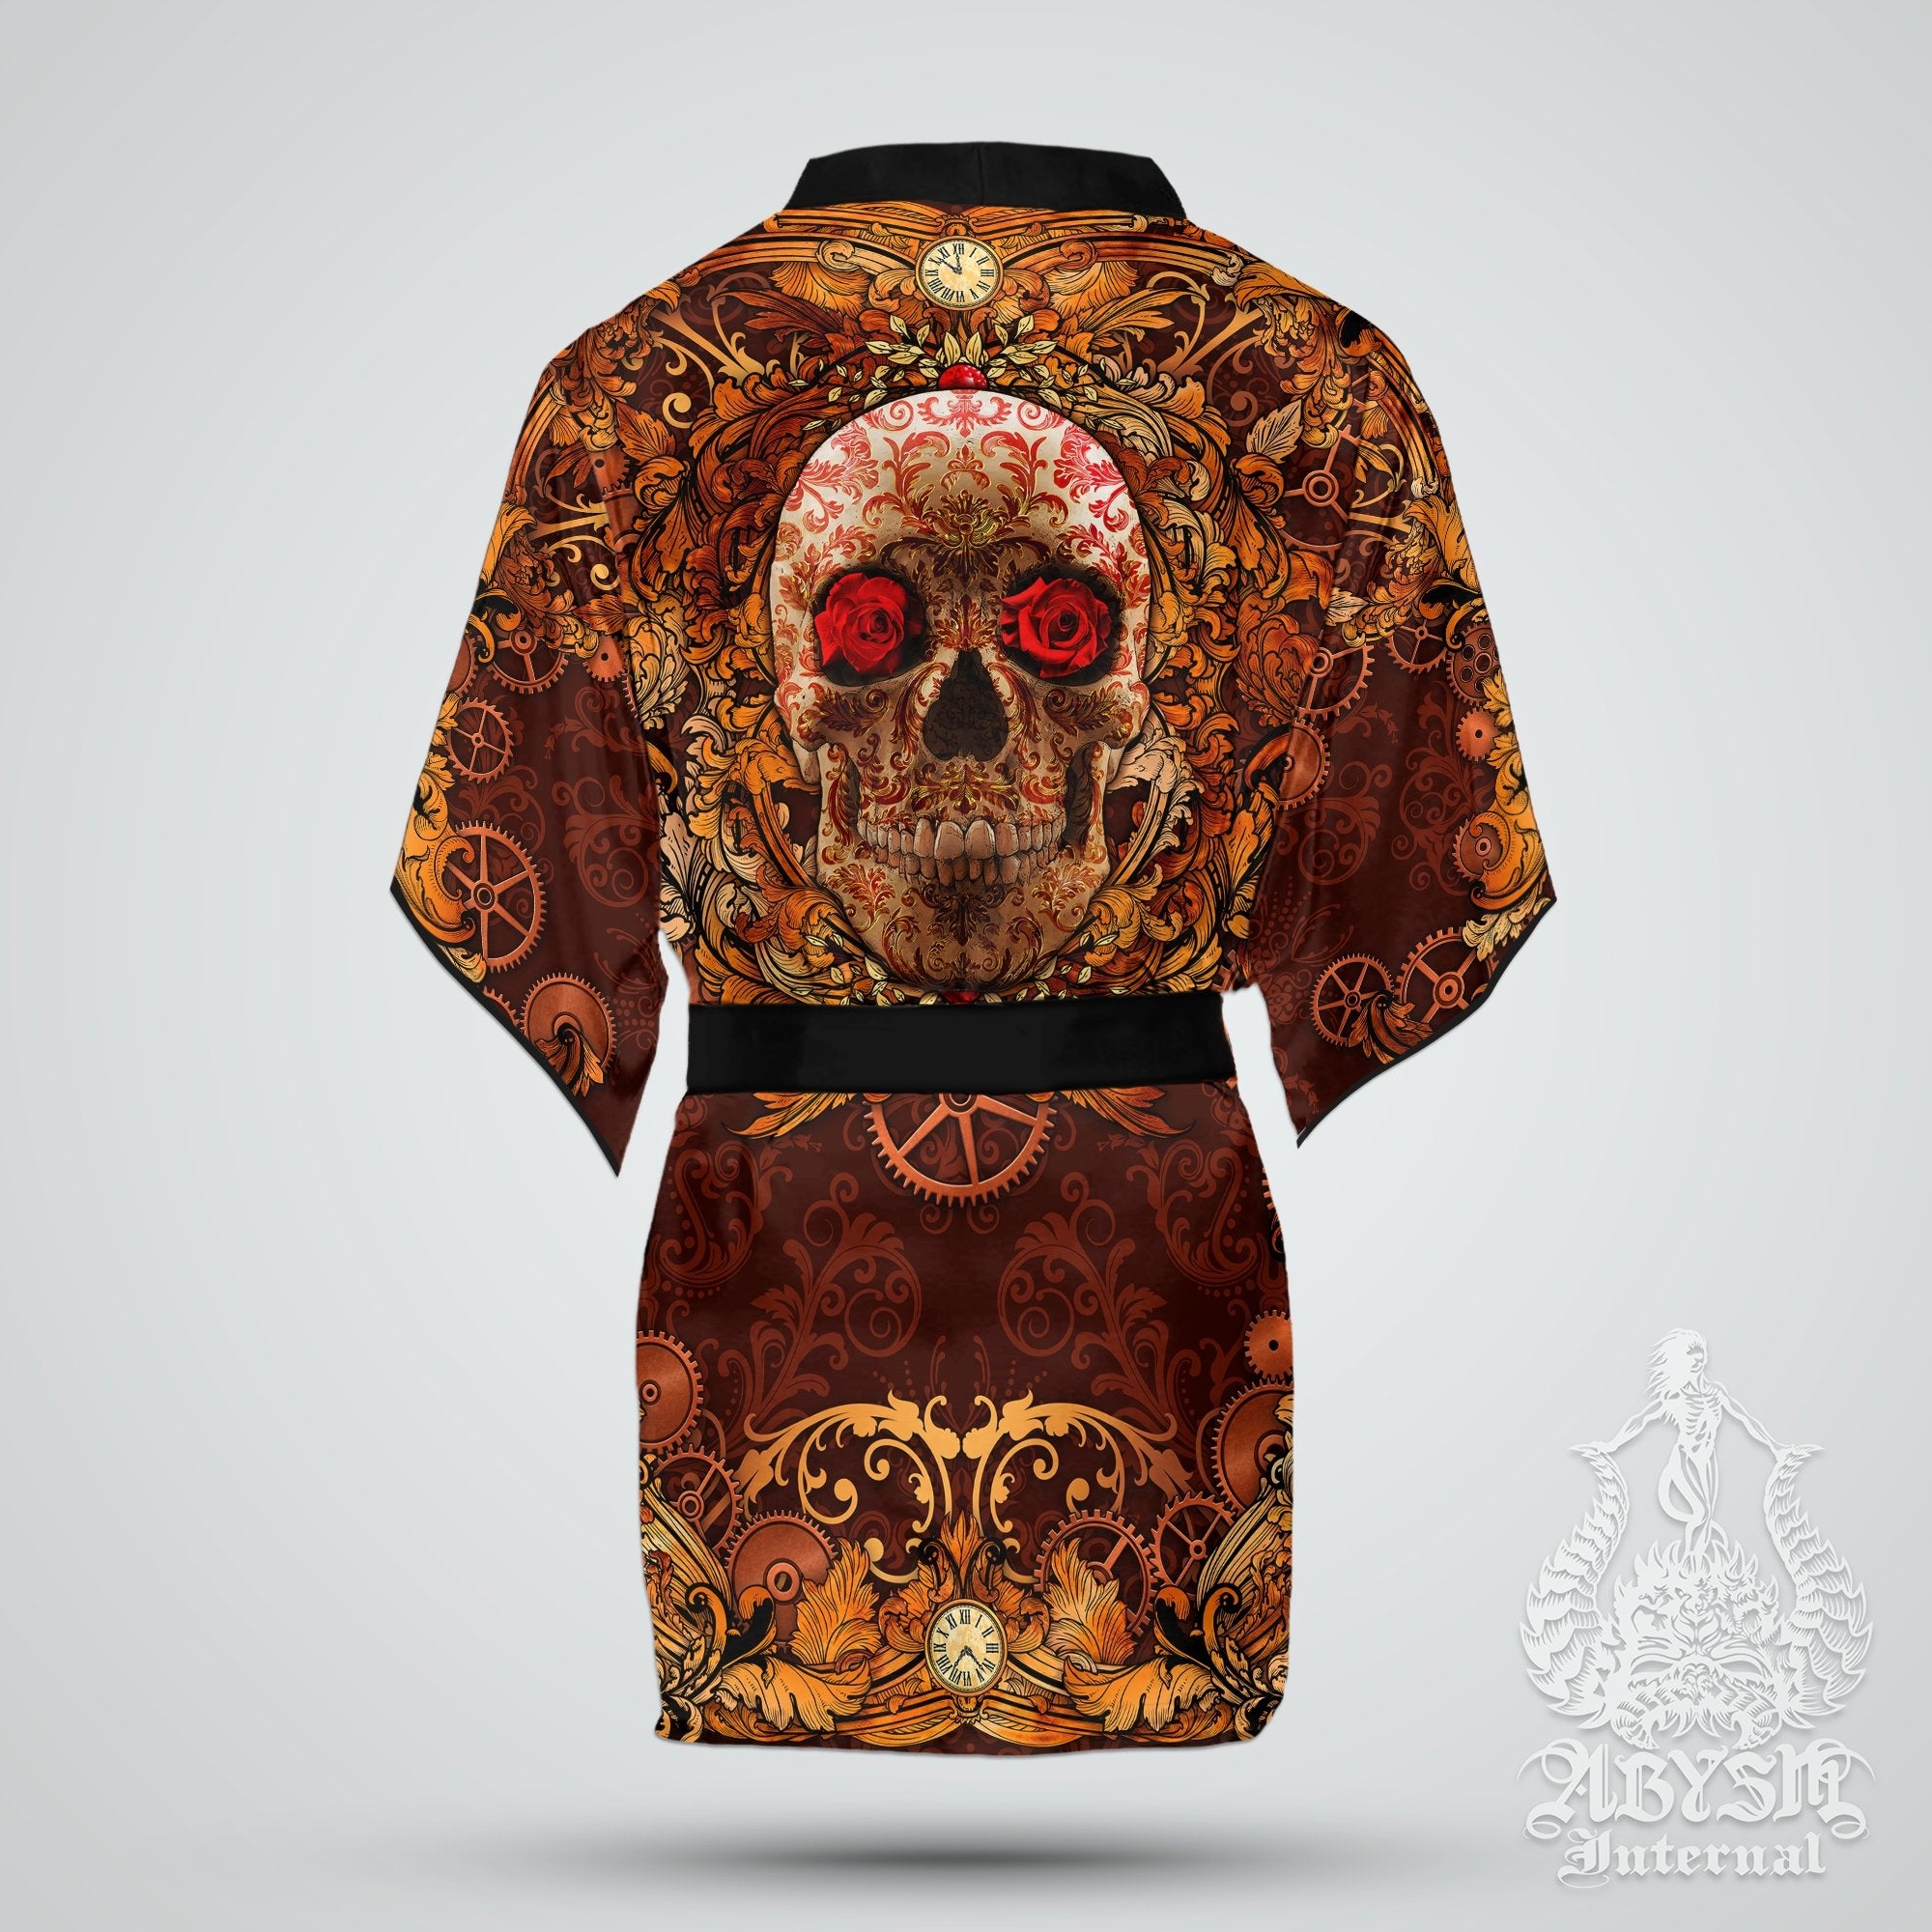 Skull Cover Up, Beach Outfit, Party Kimono, Summer Festival Robe, Indie and Alternative Clothing, Unisex - Steampunk - Abysm Internal